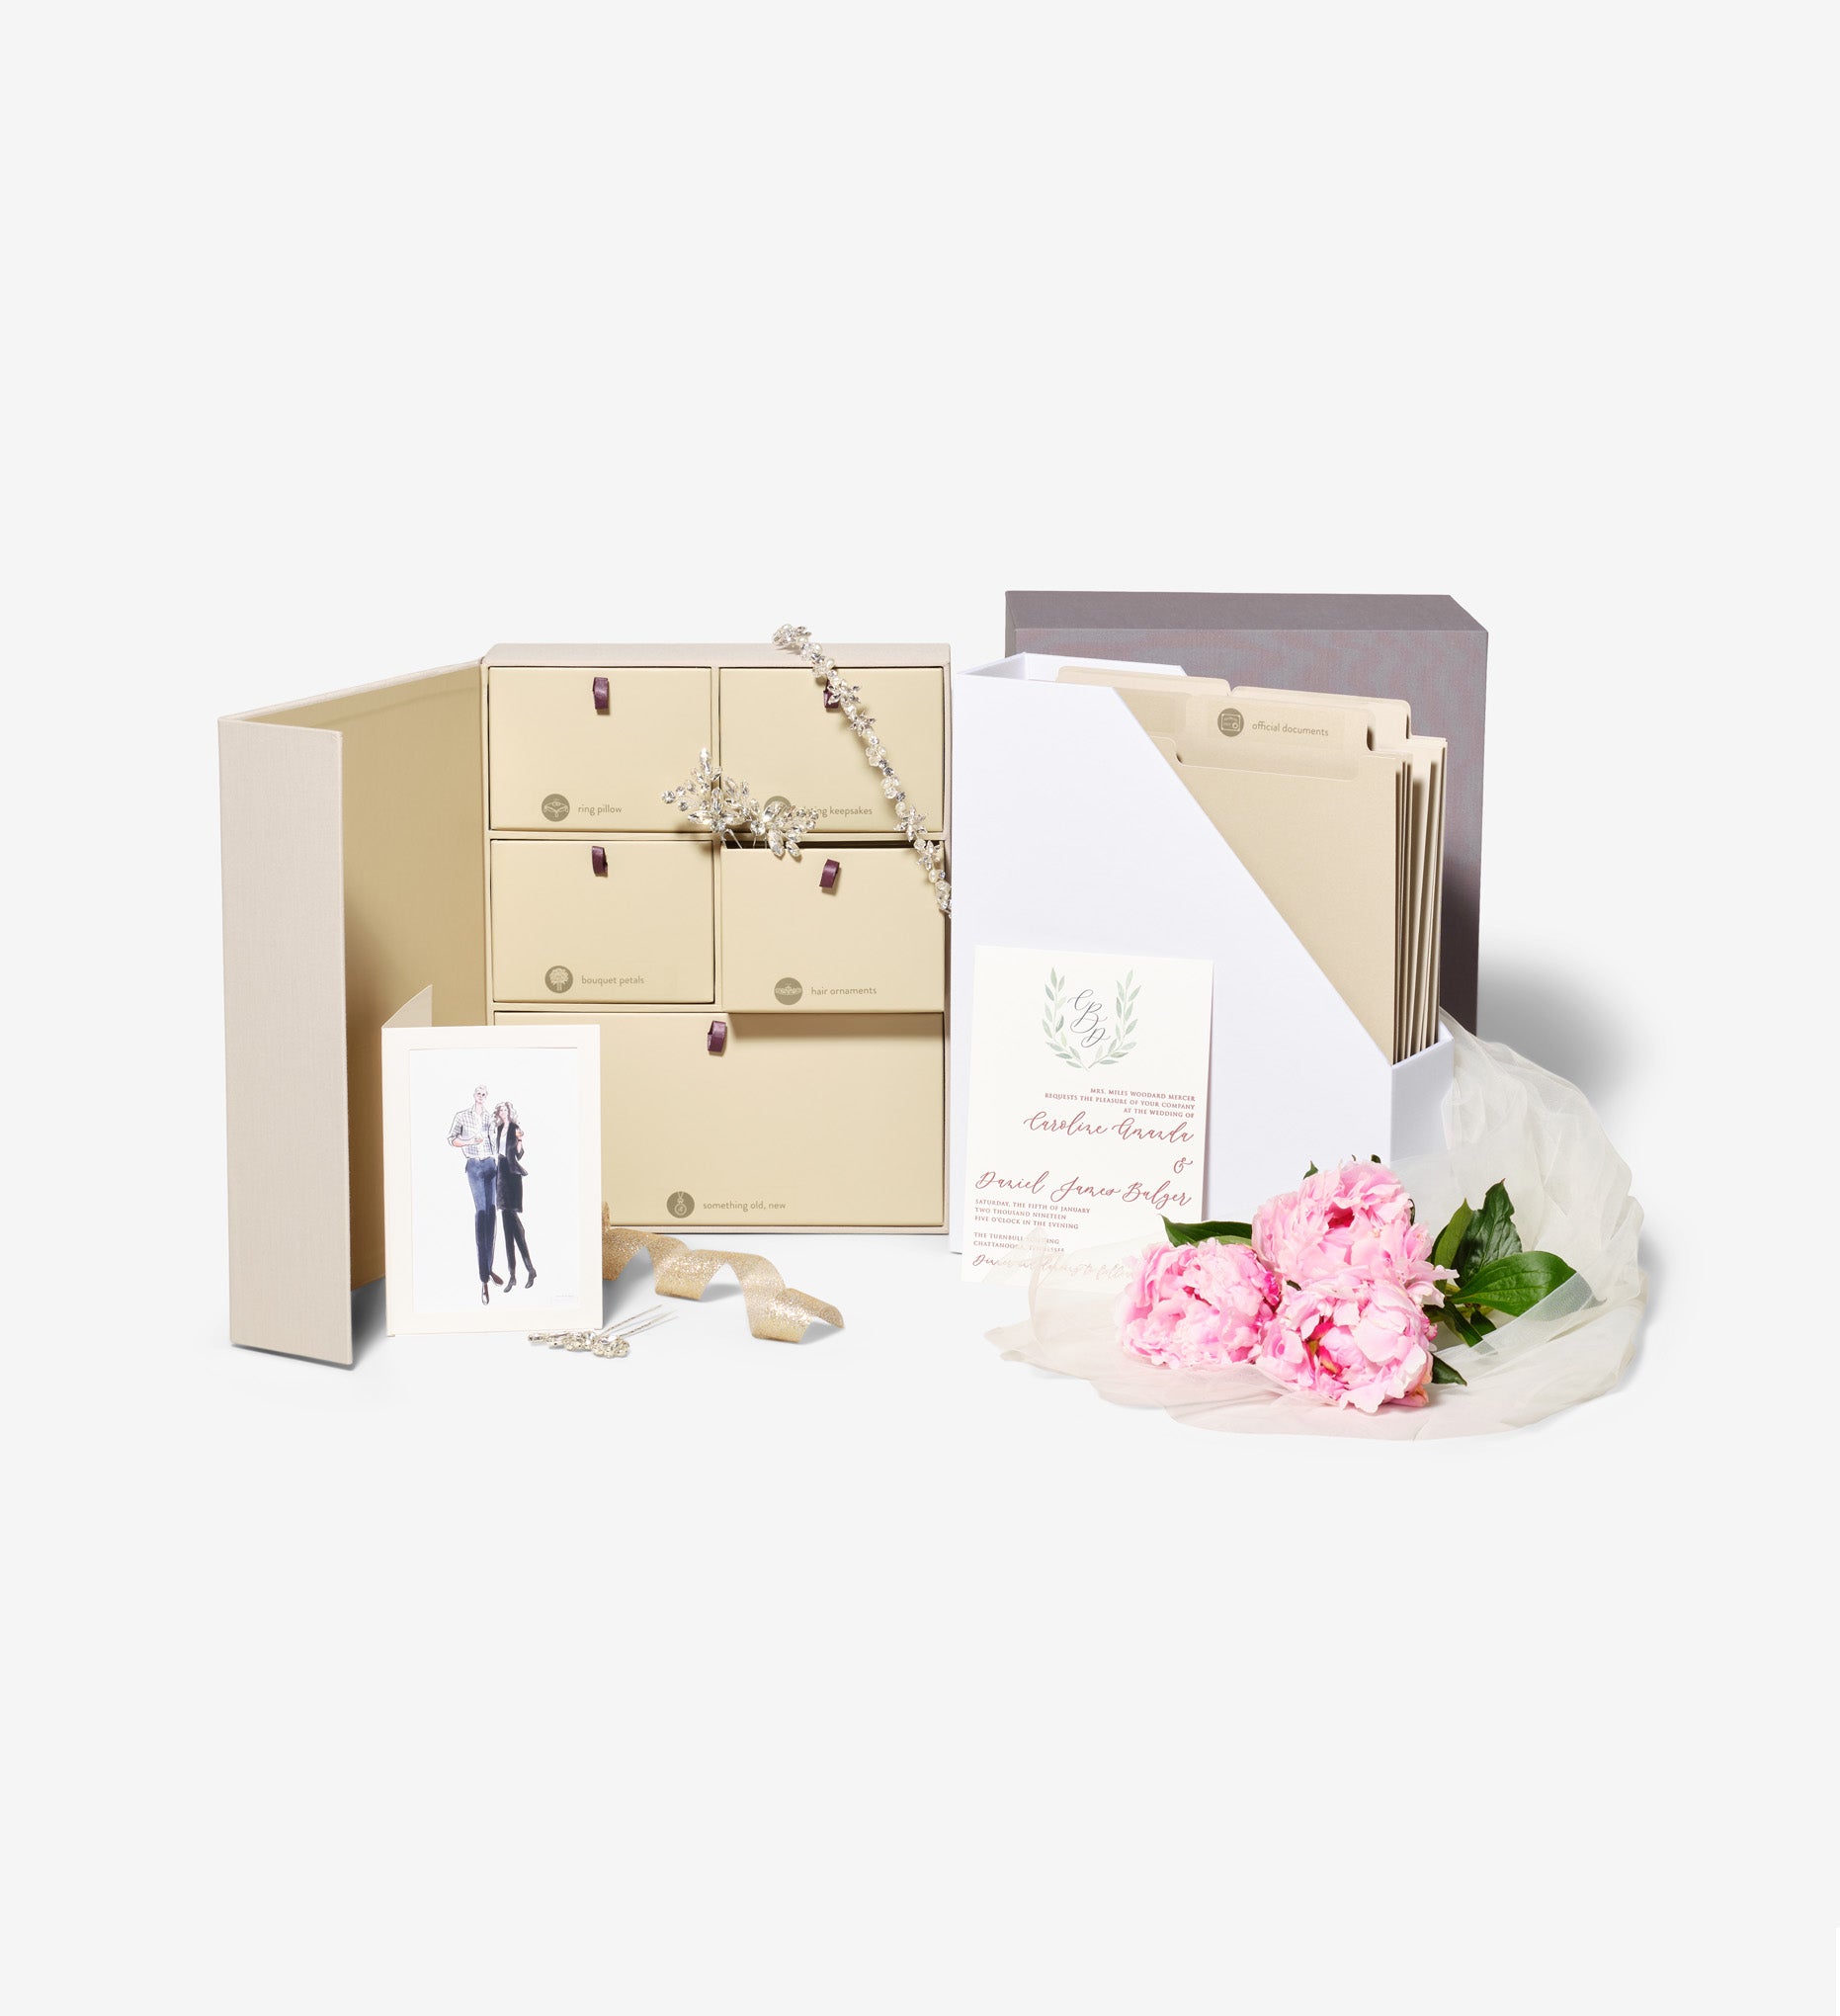 DIY BOX USING FOLDER, 6 PESOS ONLY!, Packaging Ideas for Small Business